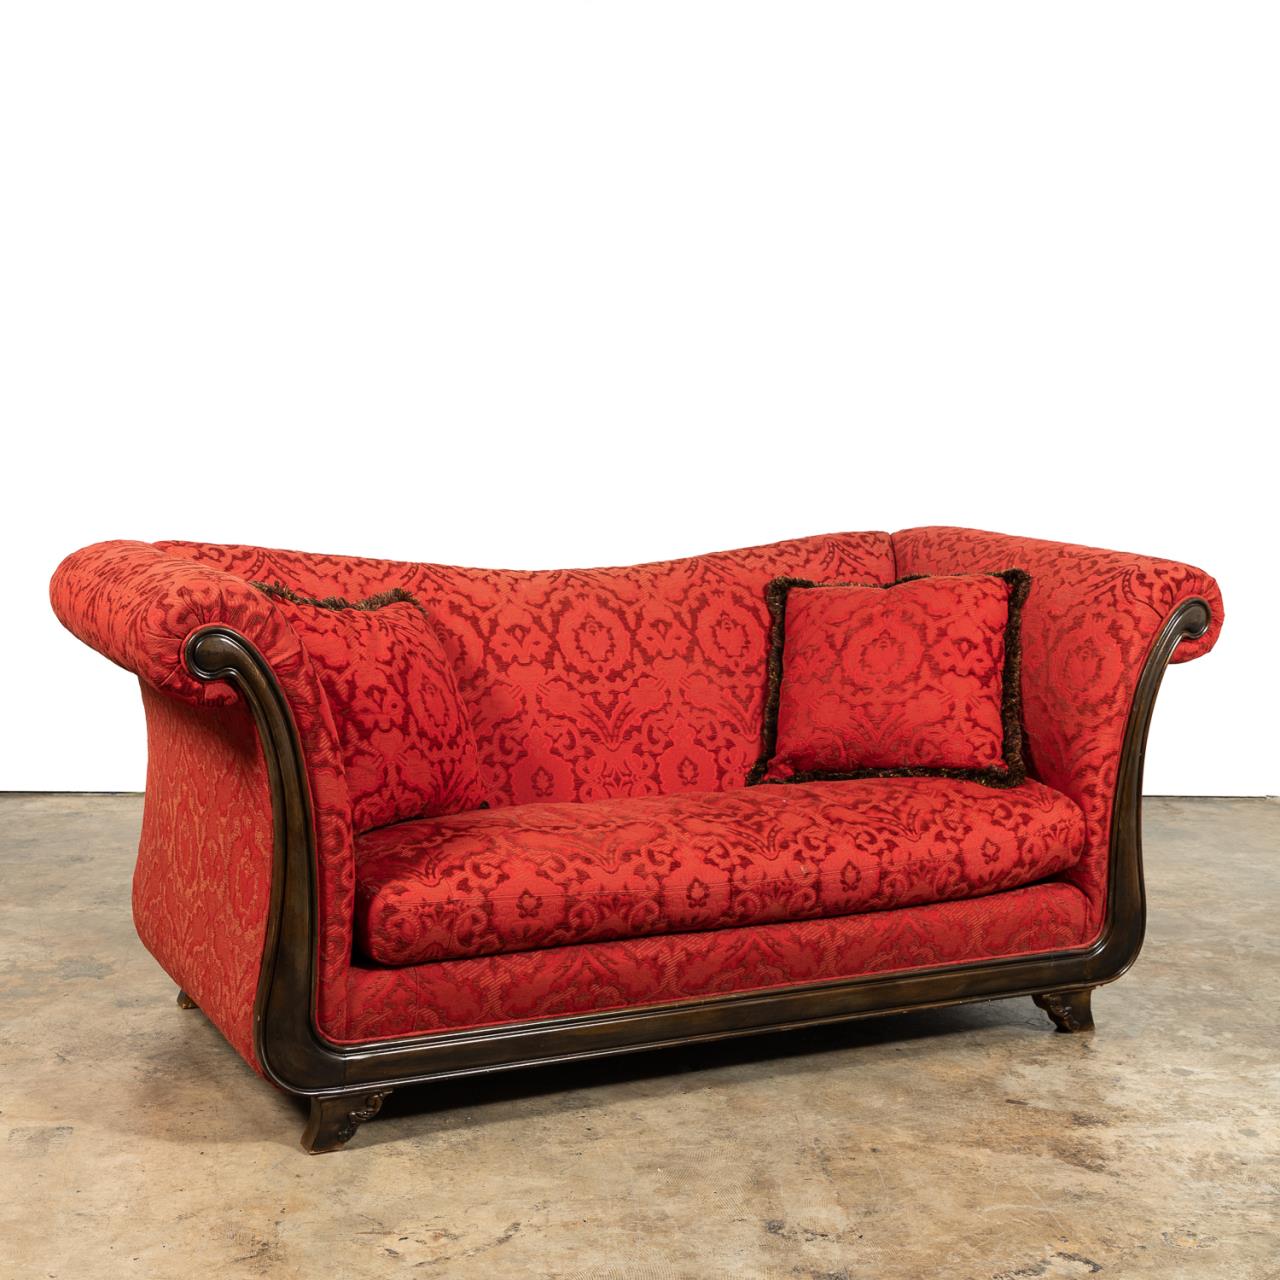 AMERICAN EMPIRE STYLE RED UPHOLSTERED 35d46c